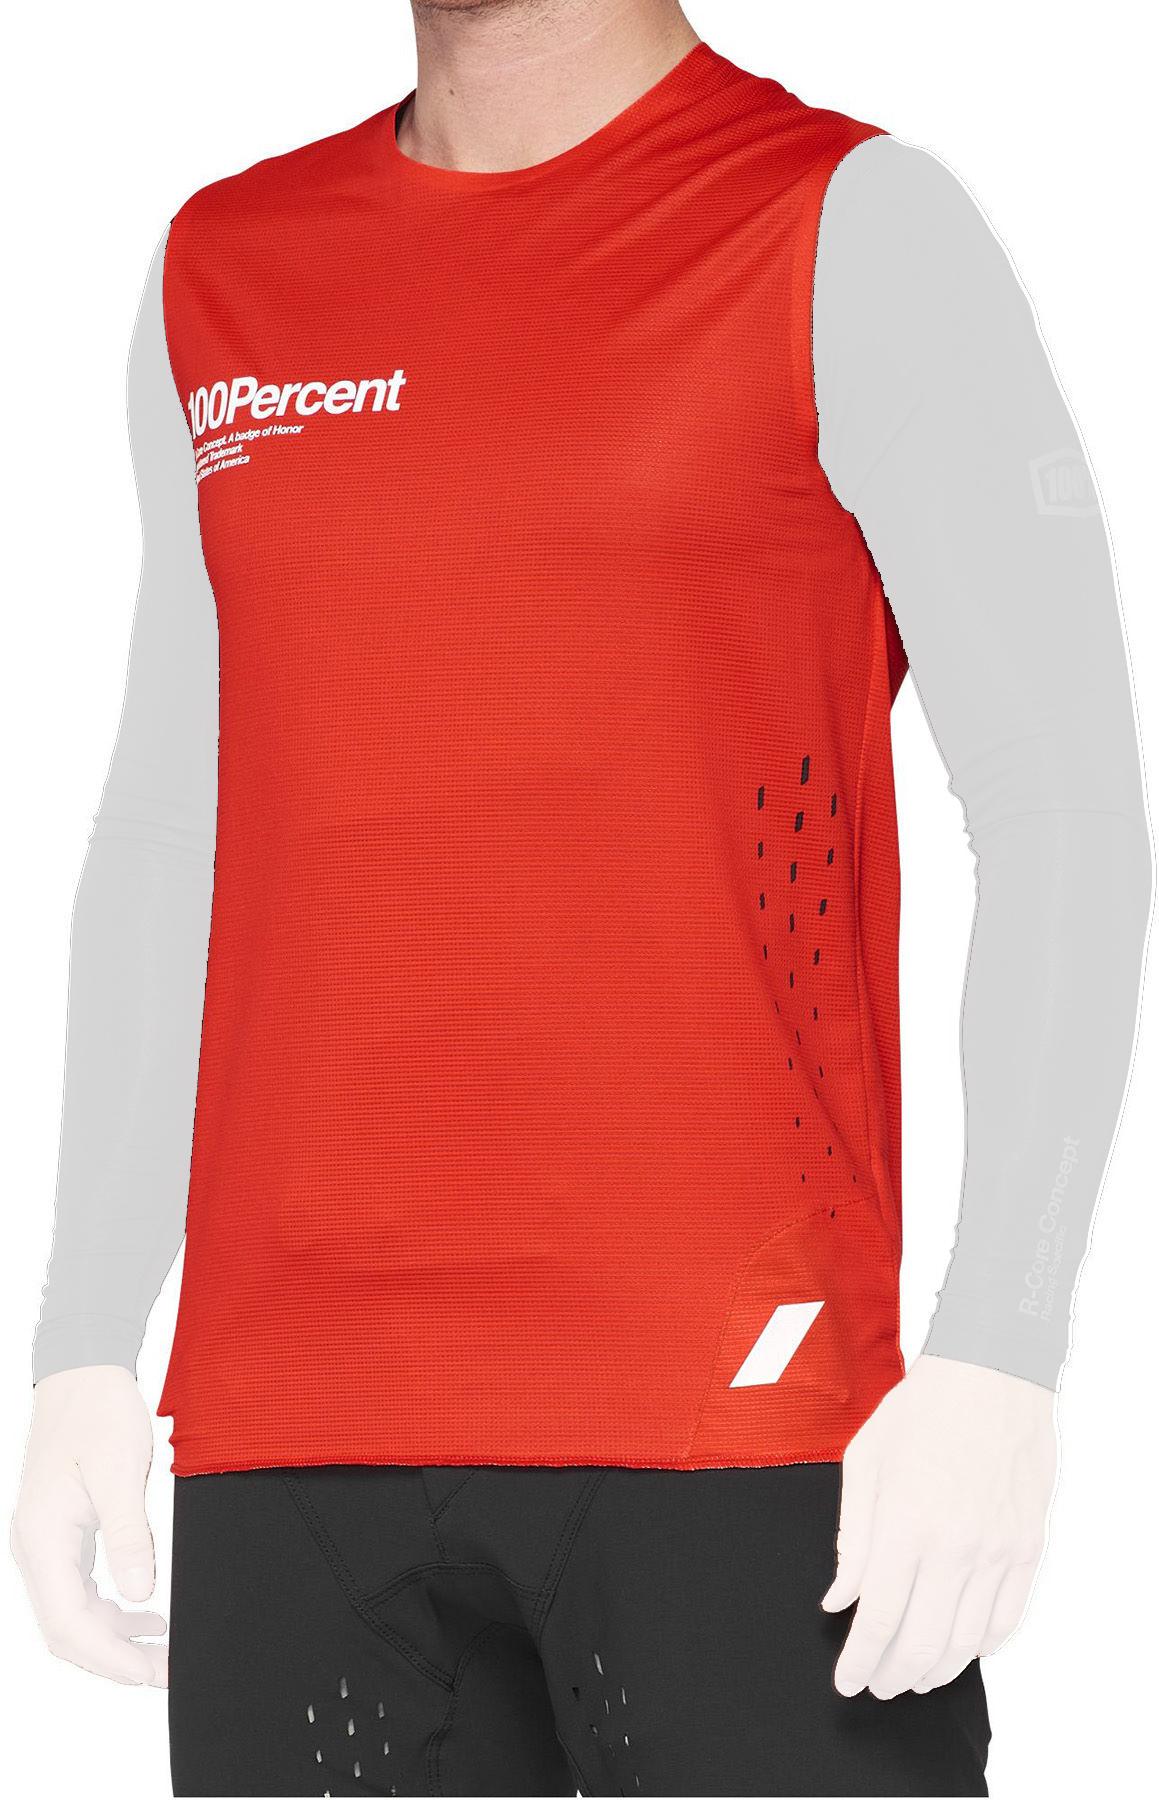 100% R-core Concept Jersey - Red